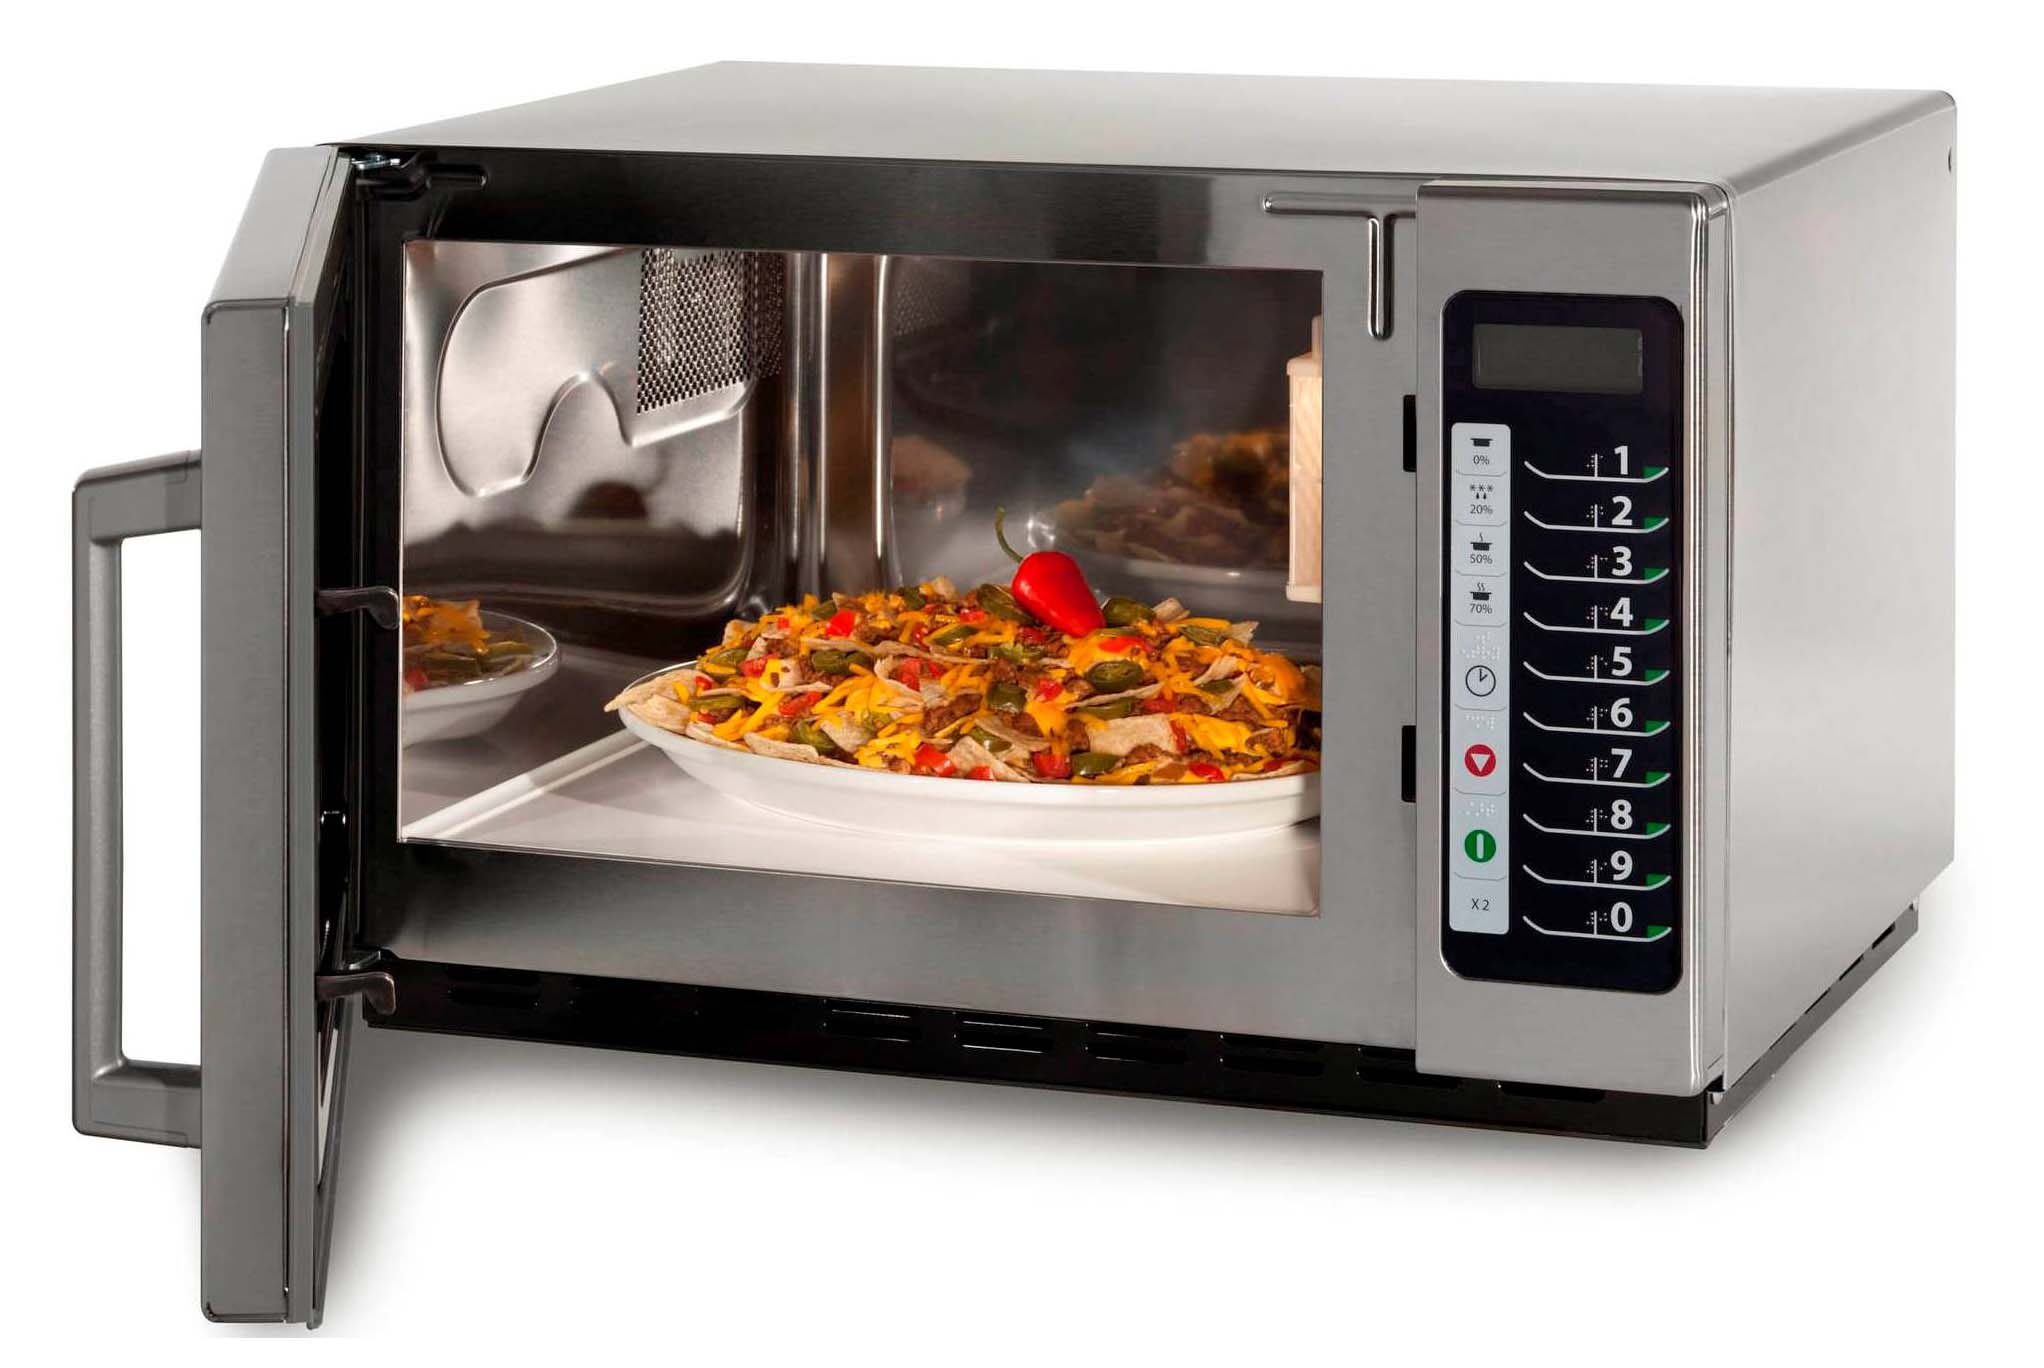 What Should Happen To Food Right After It Is Thawed In A Microwave Oven?